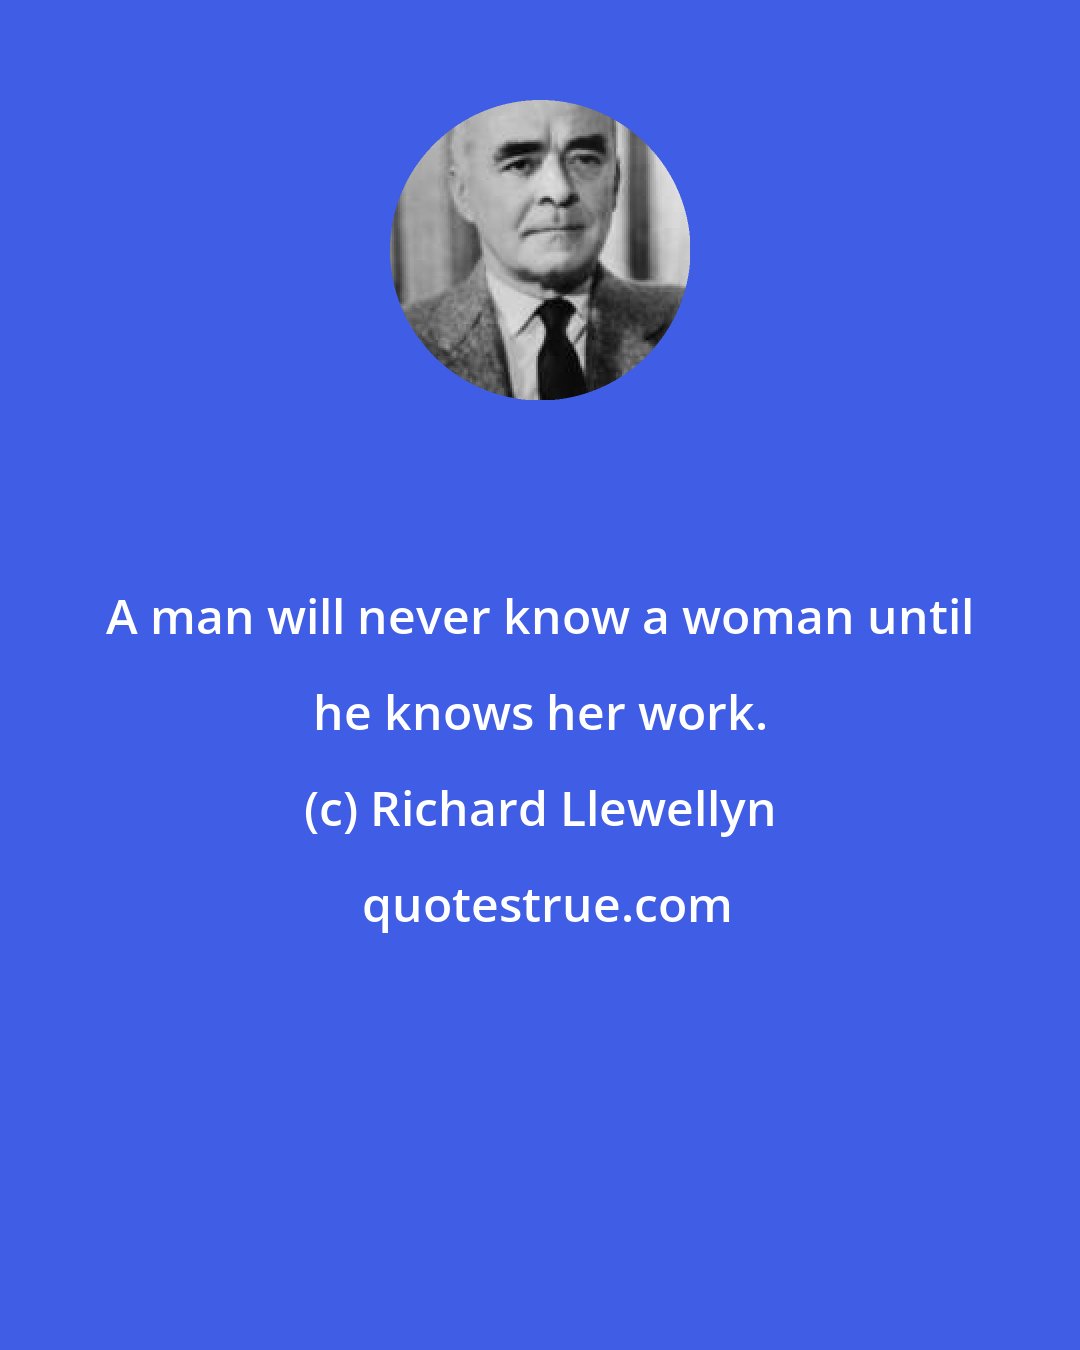 Richard Llewellyn: A man will never know a woman until he knows her work.